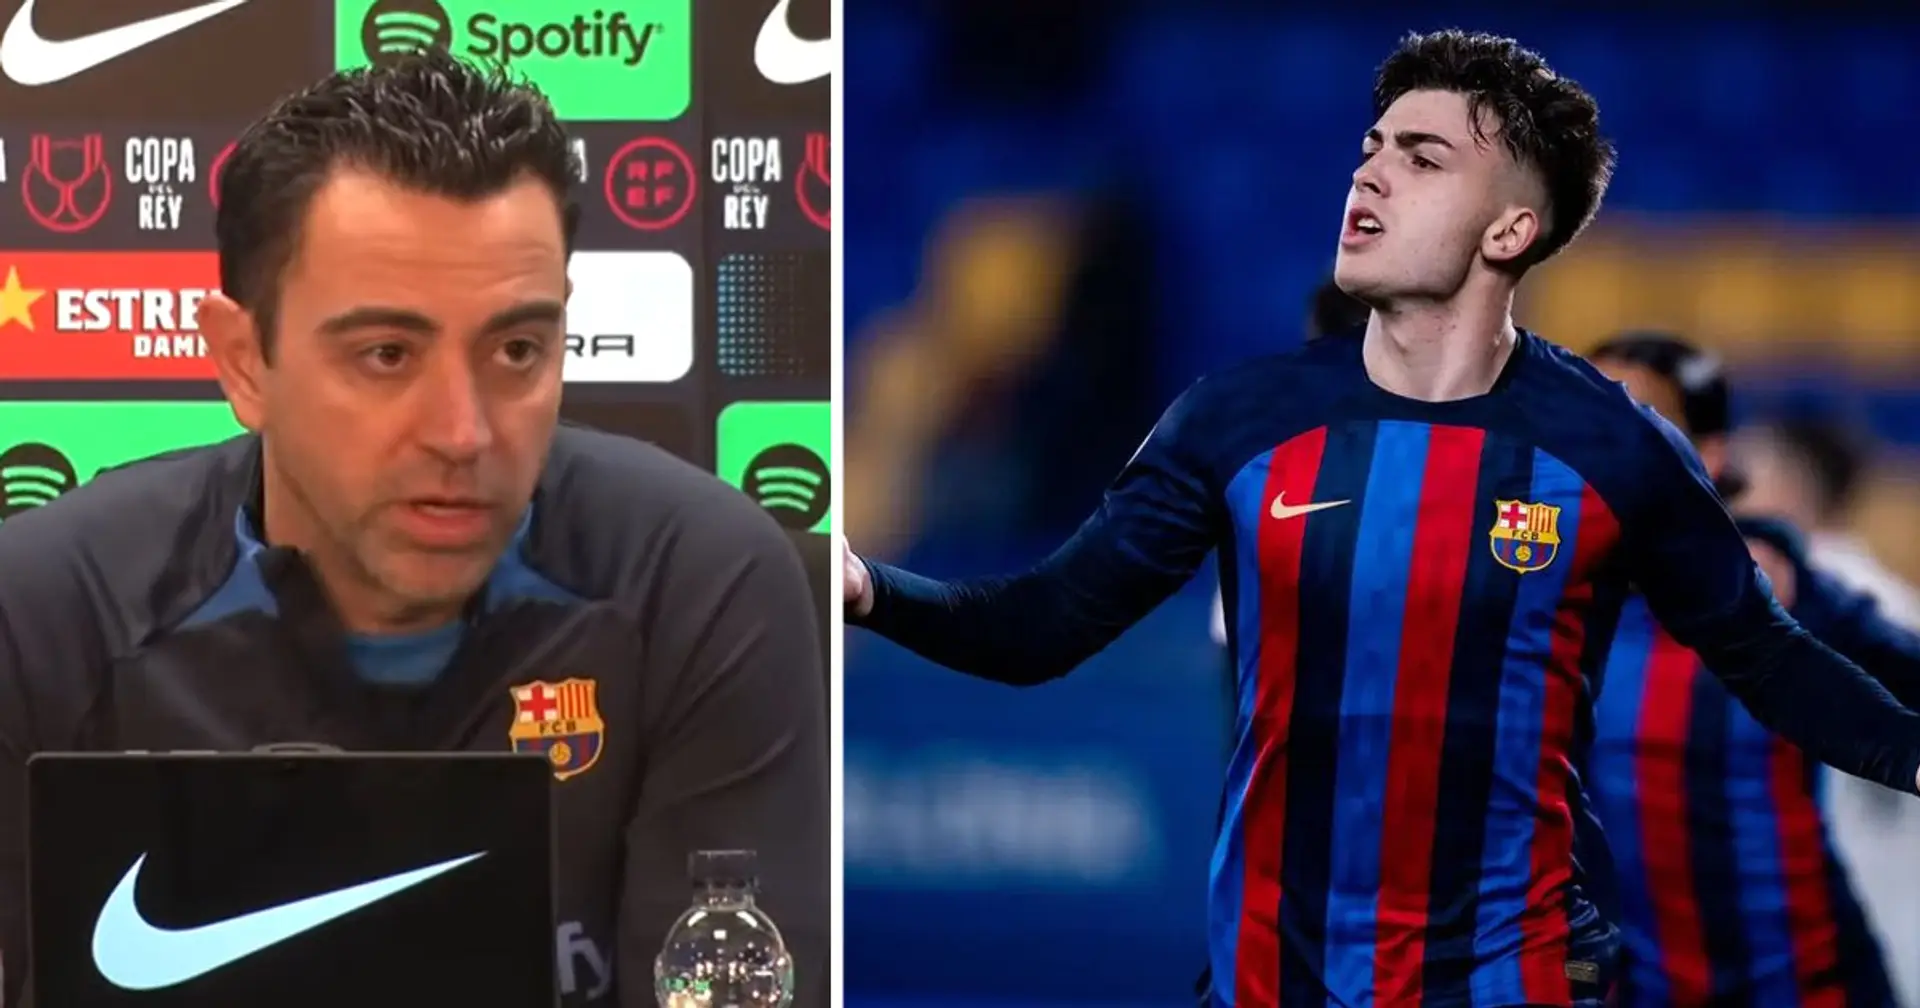 Xavi names one starter who won't travel for Ceuta game, hints at minimal rotations